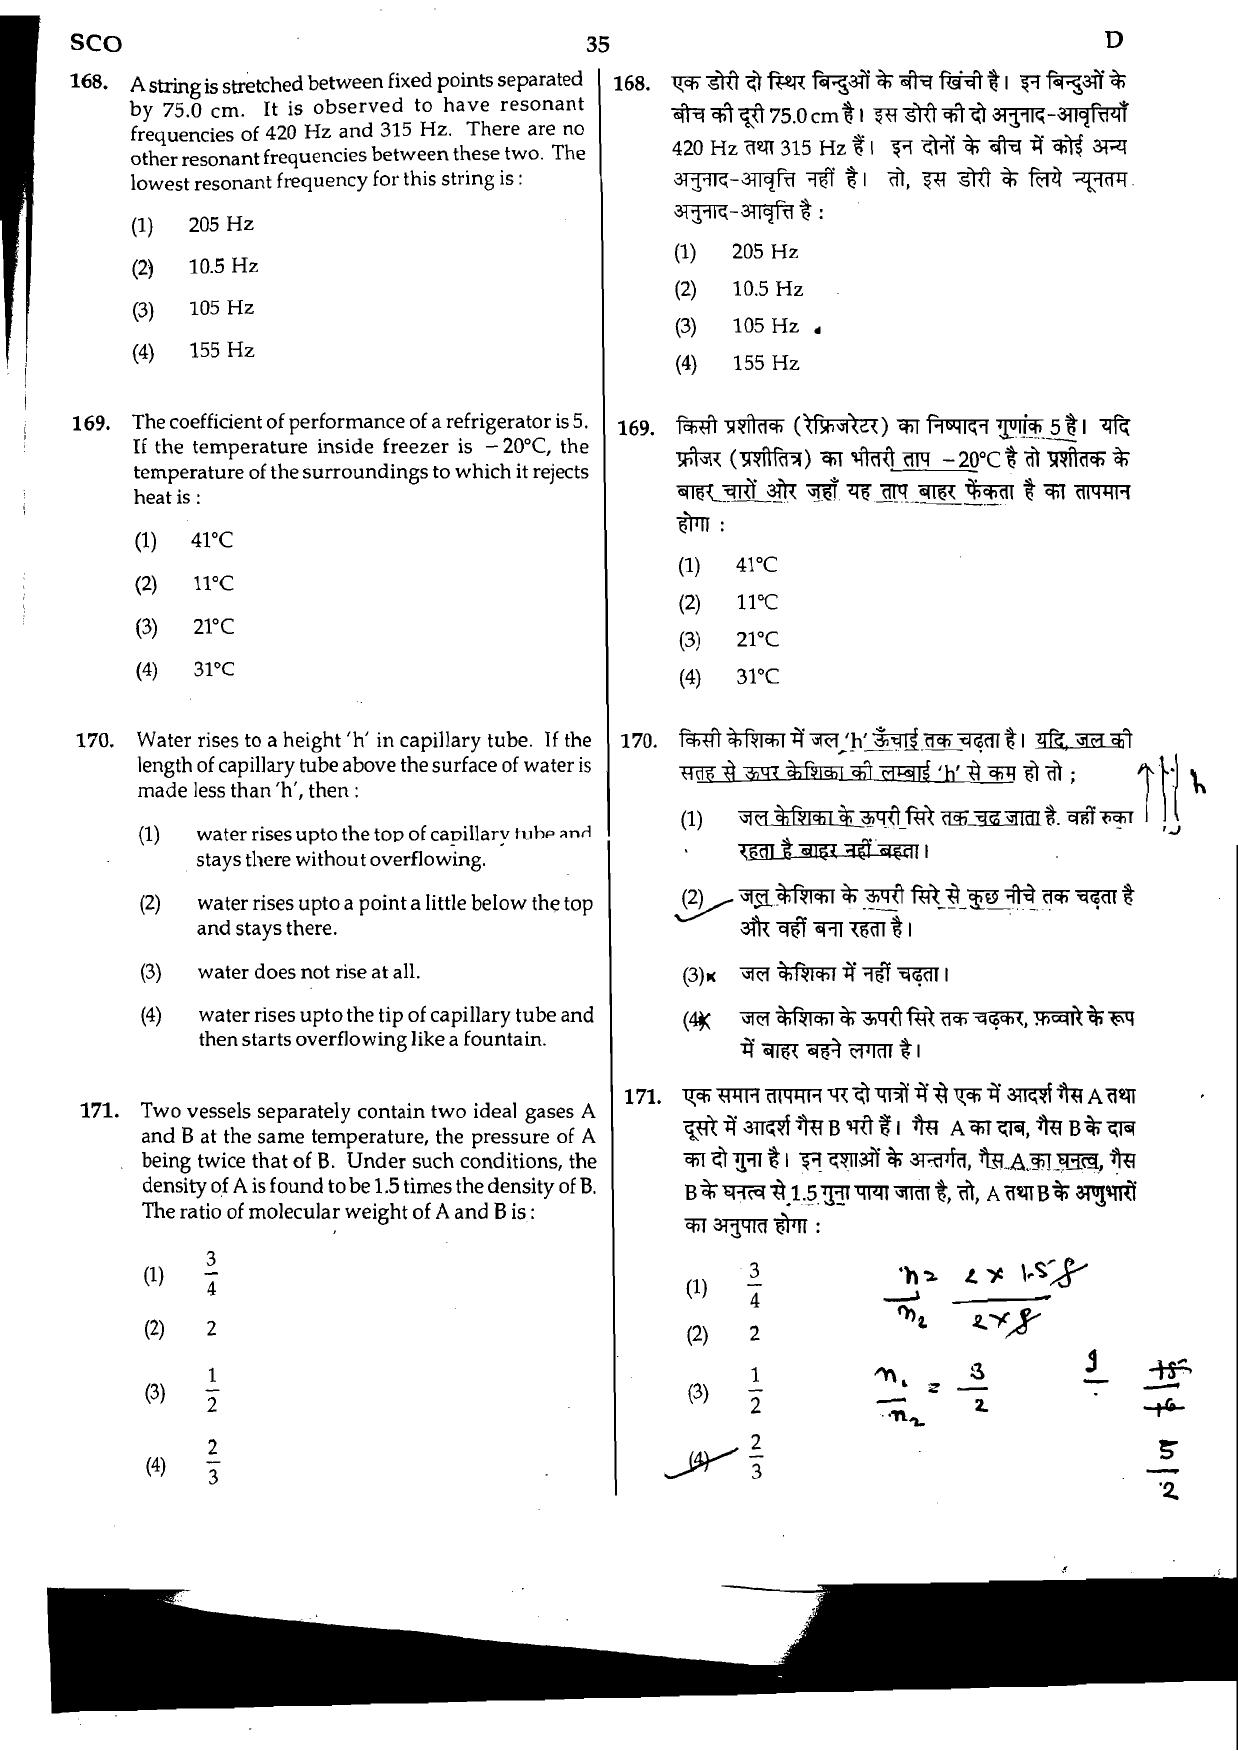 NEET Code D 2015 Question Paper - Page 35